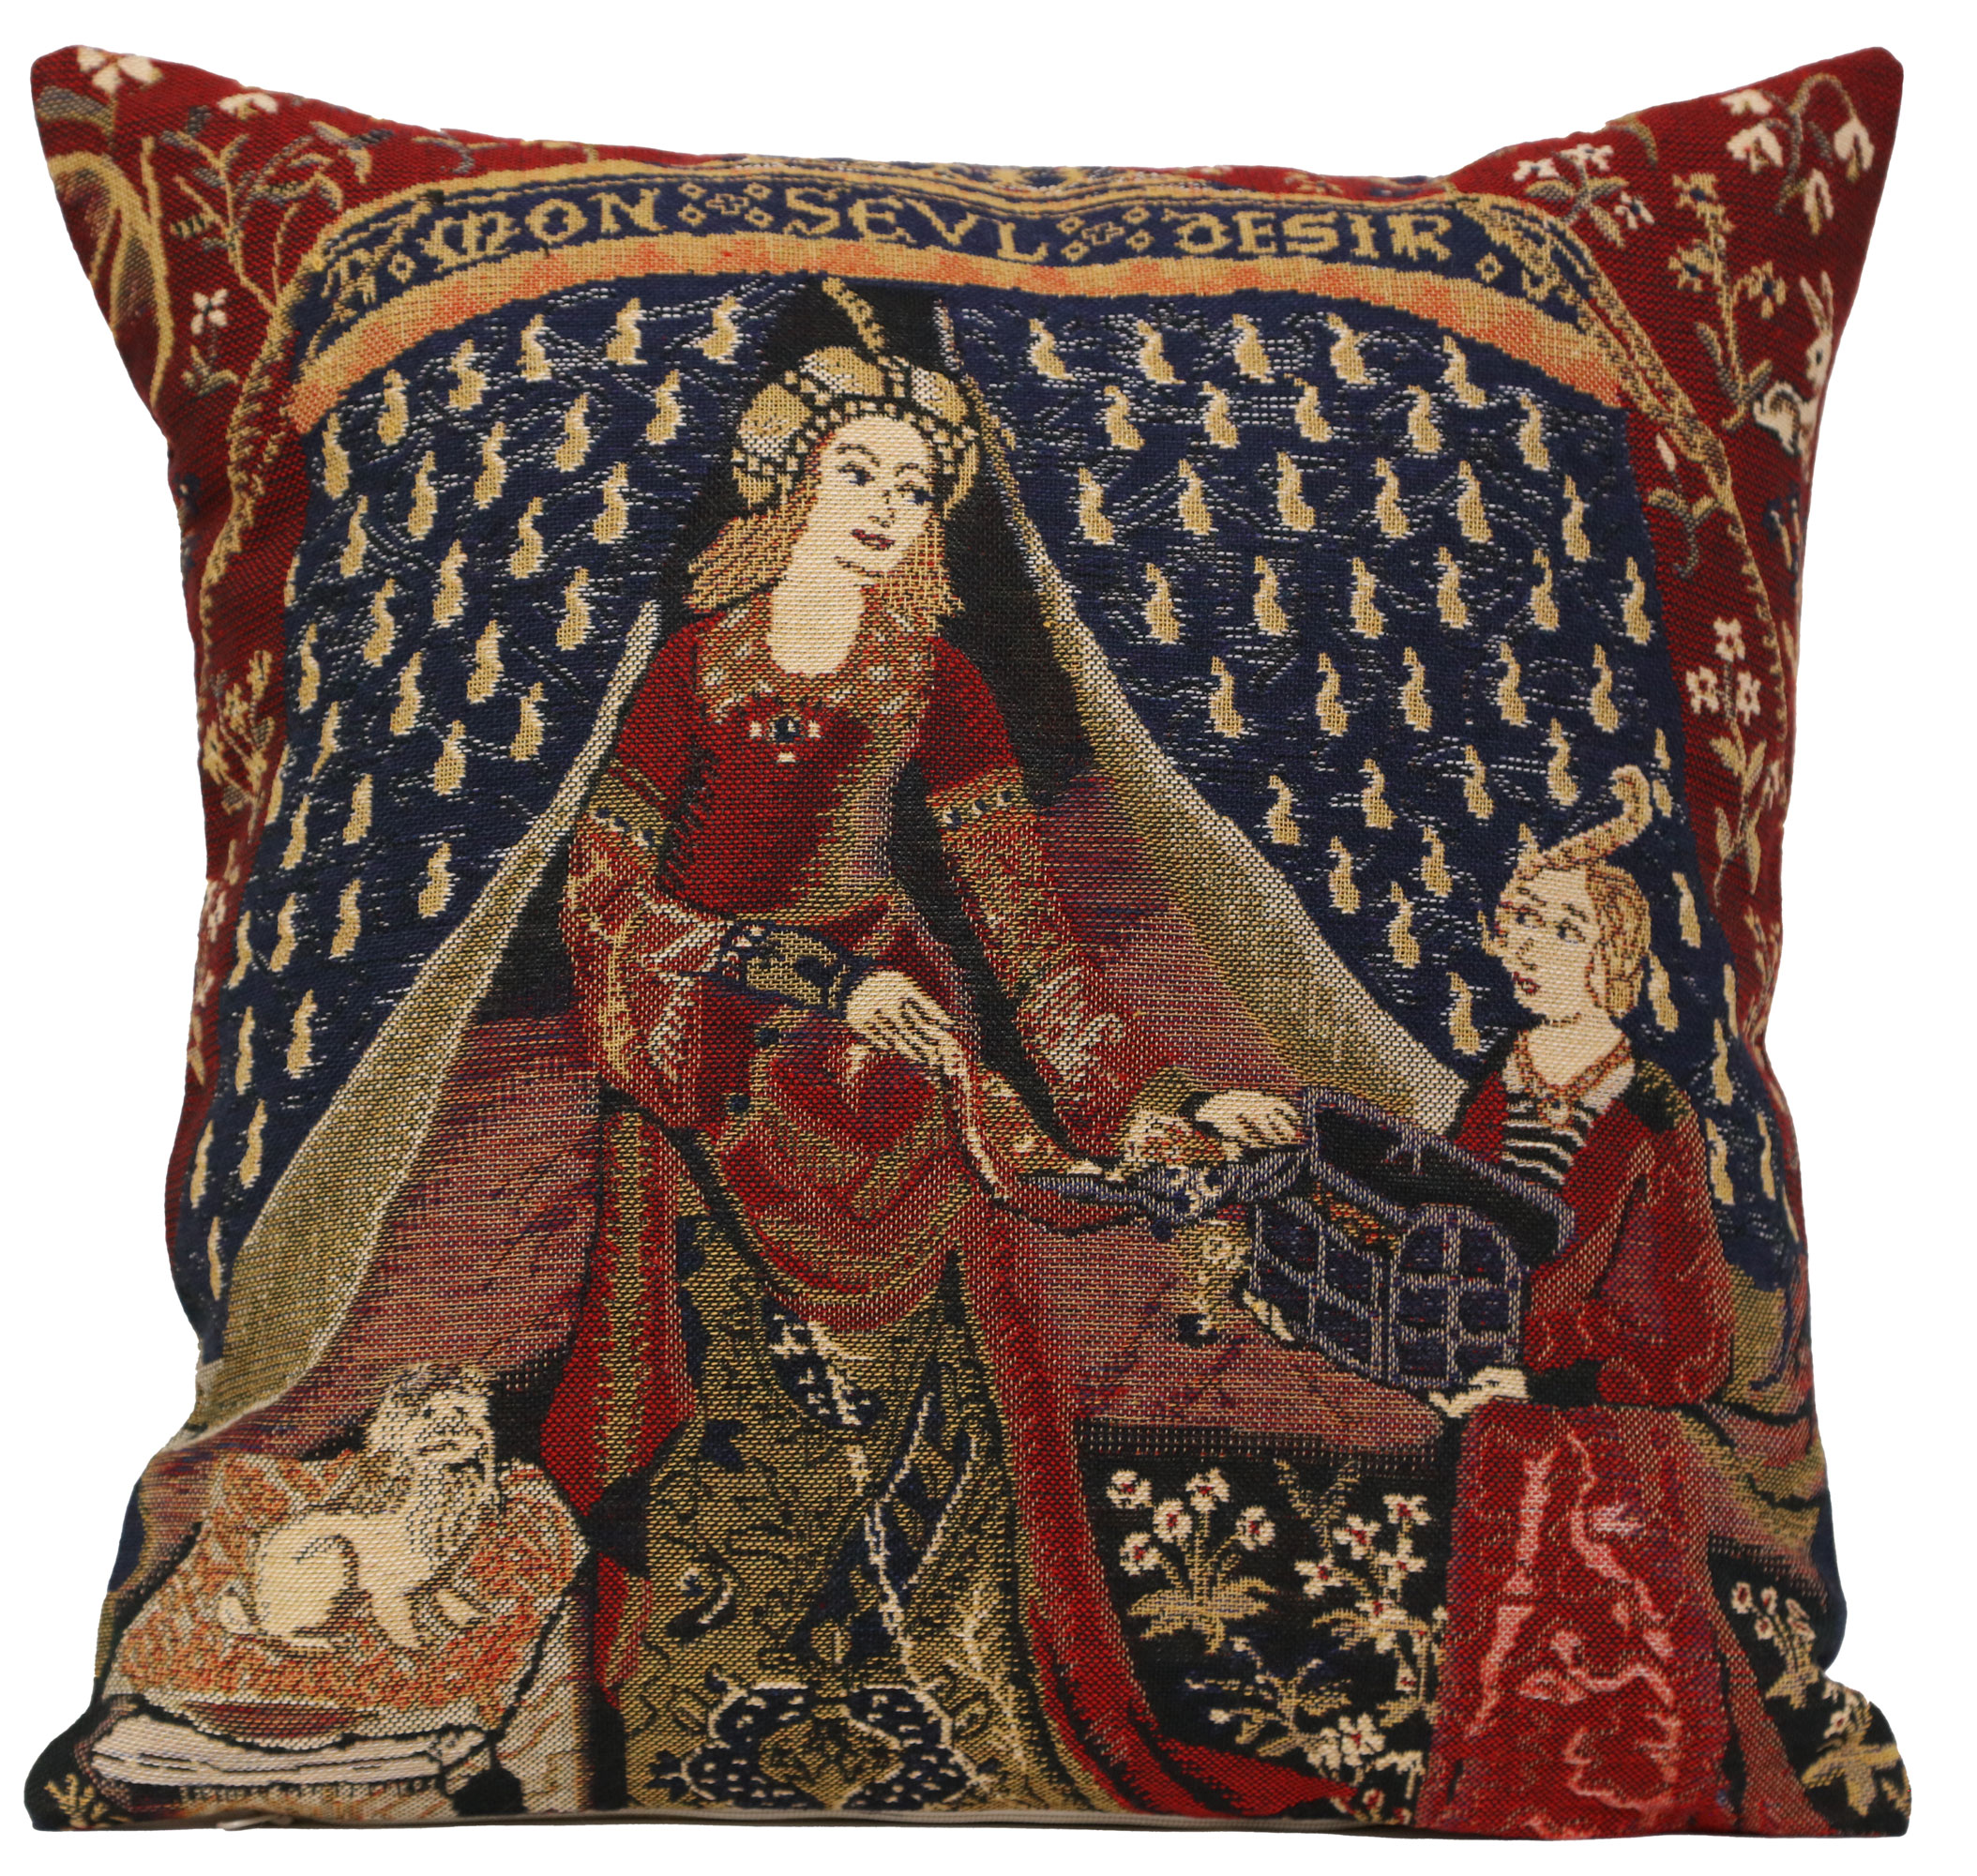 My Only Desire Decorative Throw  Pillow Cover 16x16 in 100% Cotton Cushion Cover